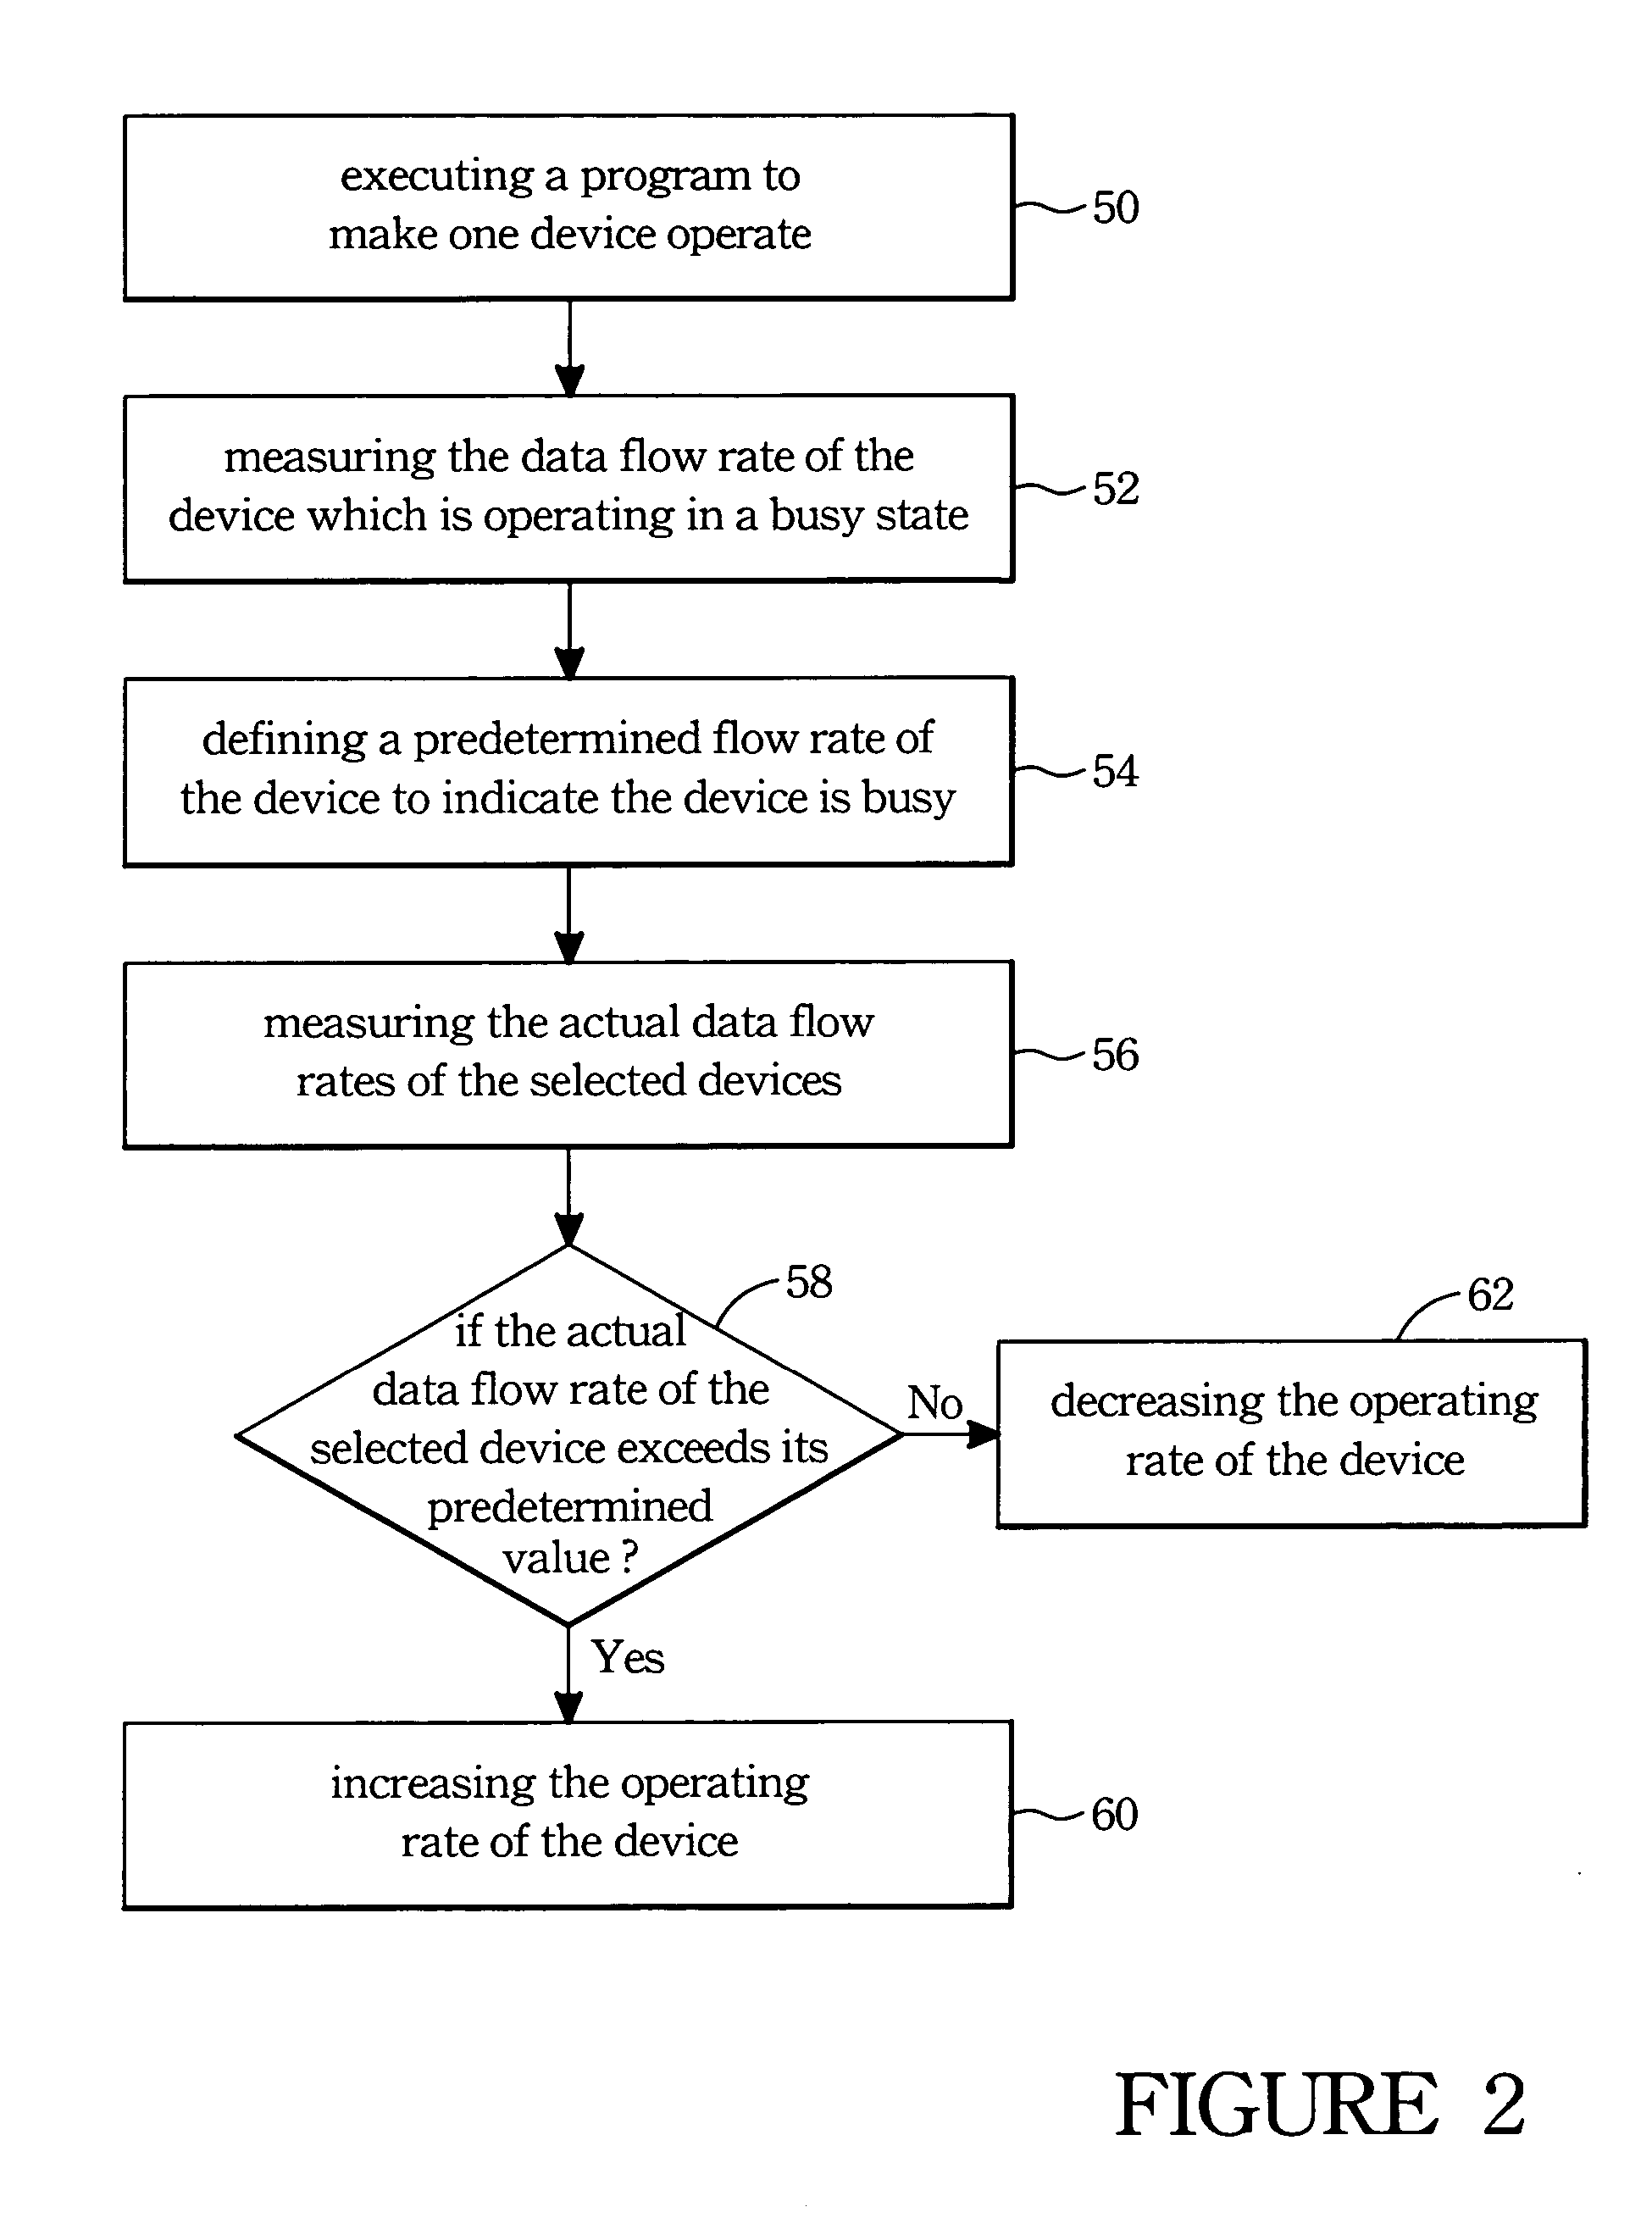 Apparatus and method for real-time adjusting system performance of a computer